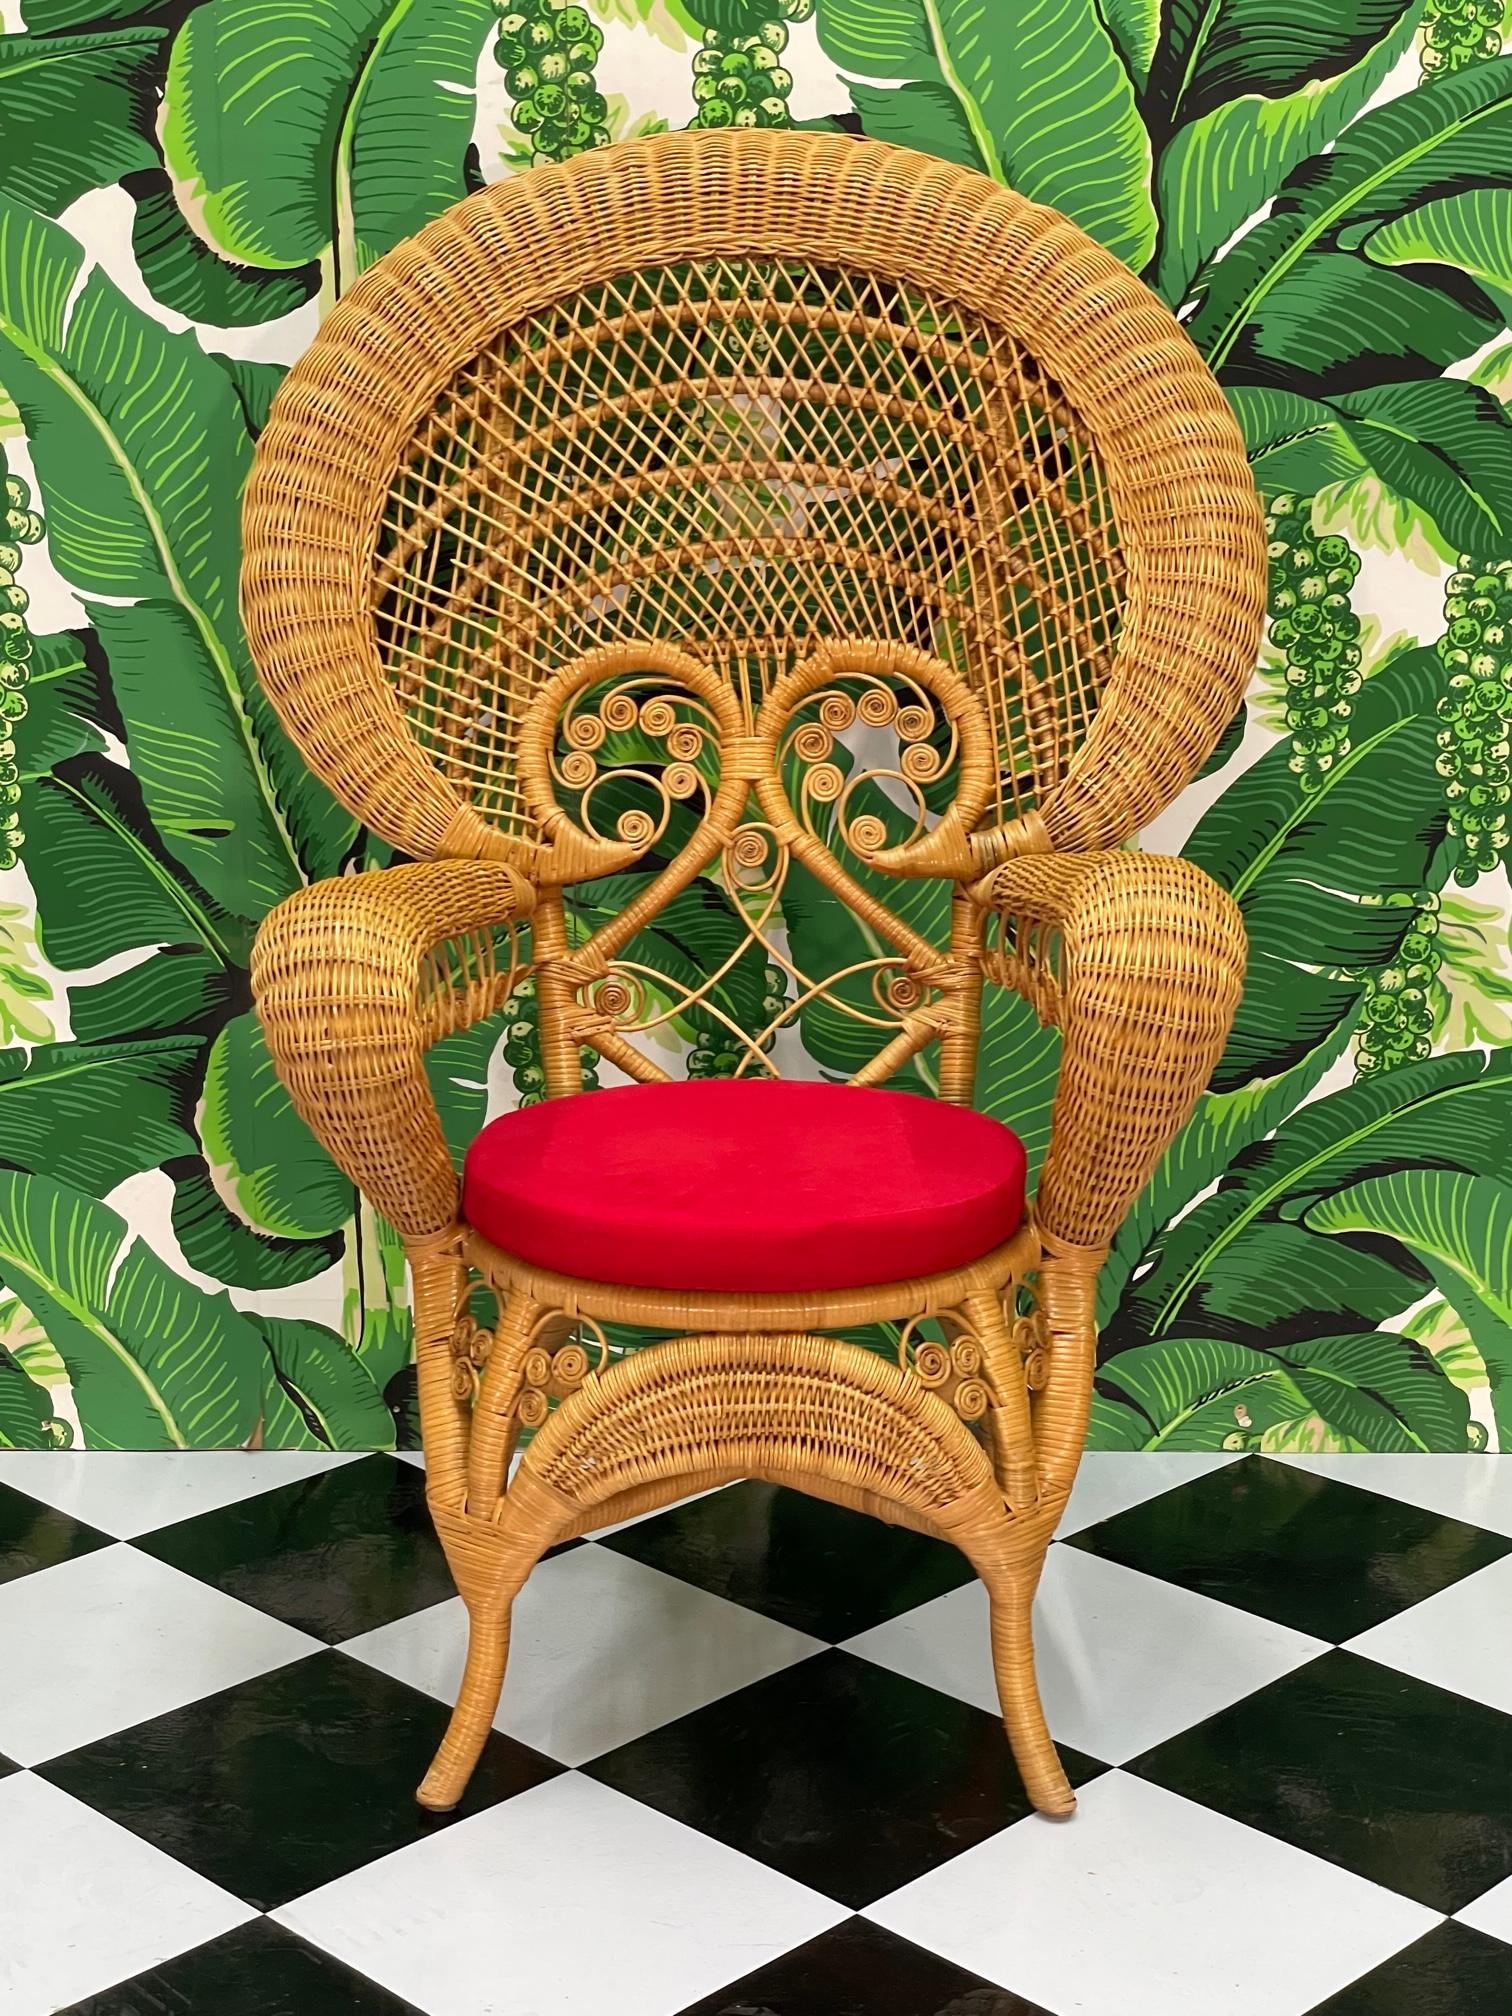 Woven wicker peacock or Emmanuelle chair features decorative fiddlehead style details and a removable red cushion. Good condition with minor imperfections consistent with age, see photos for condition details. Seat height is 17.5